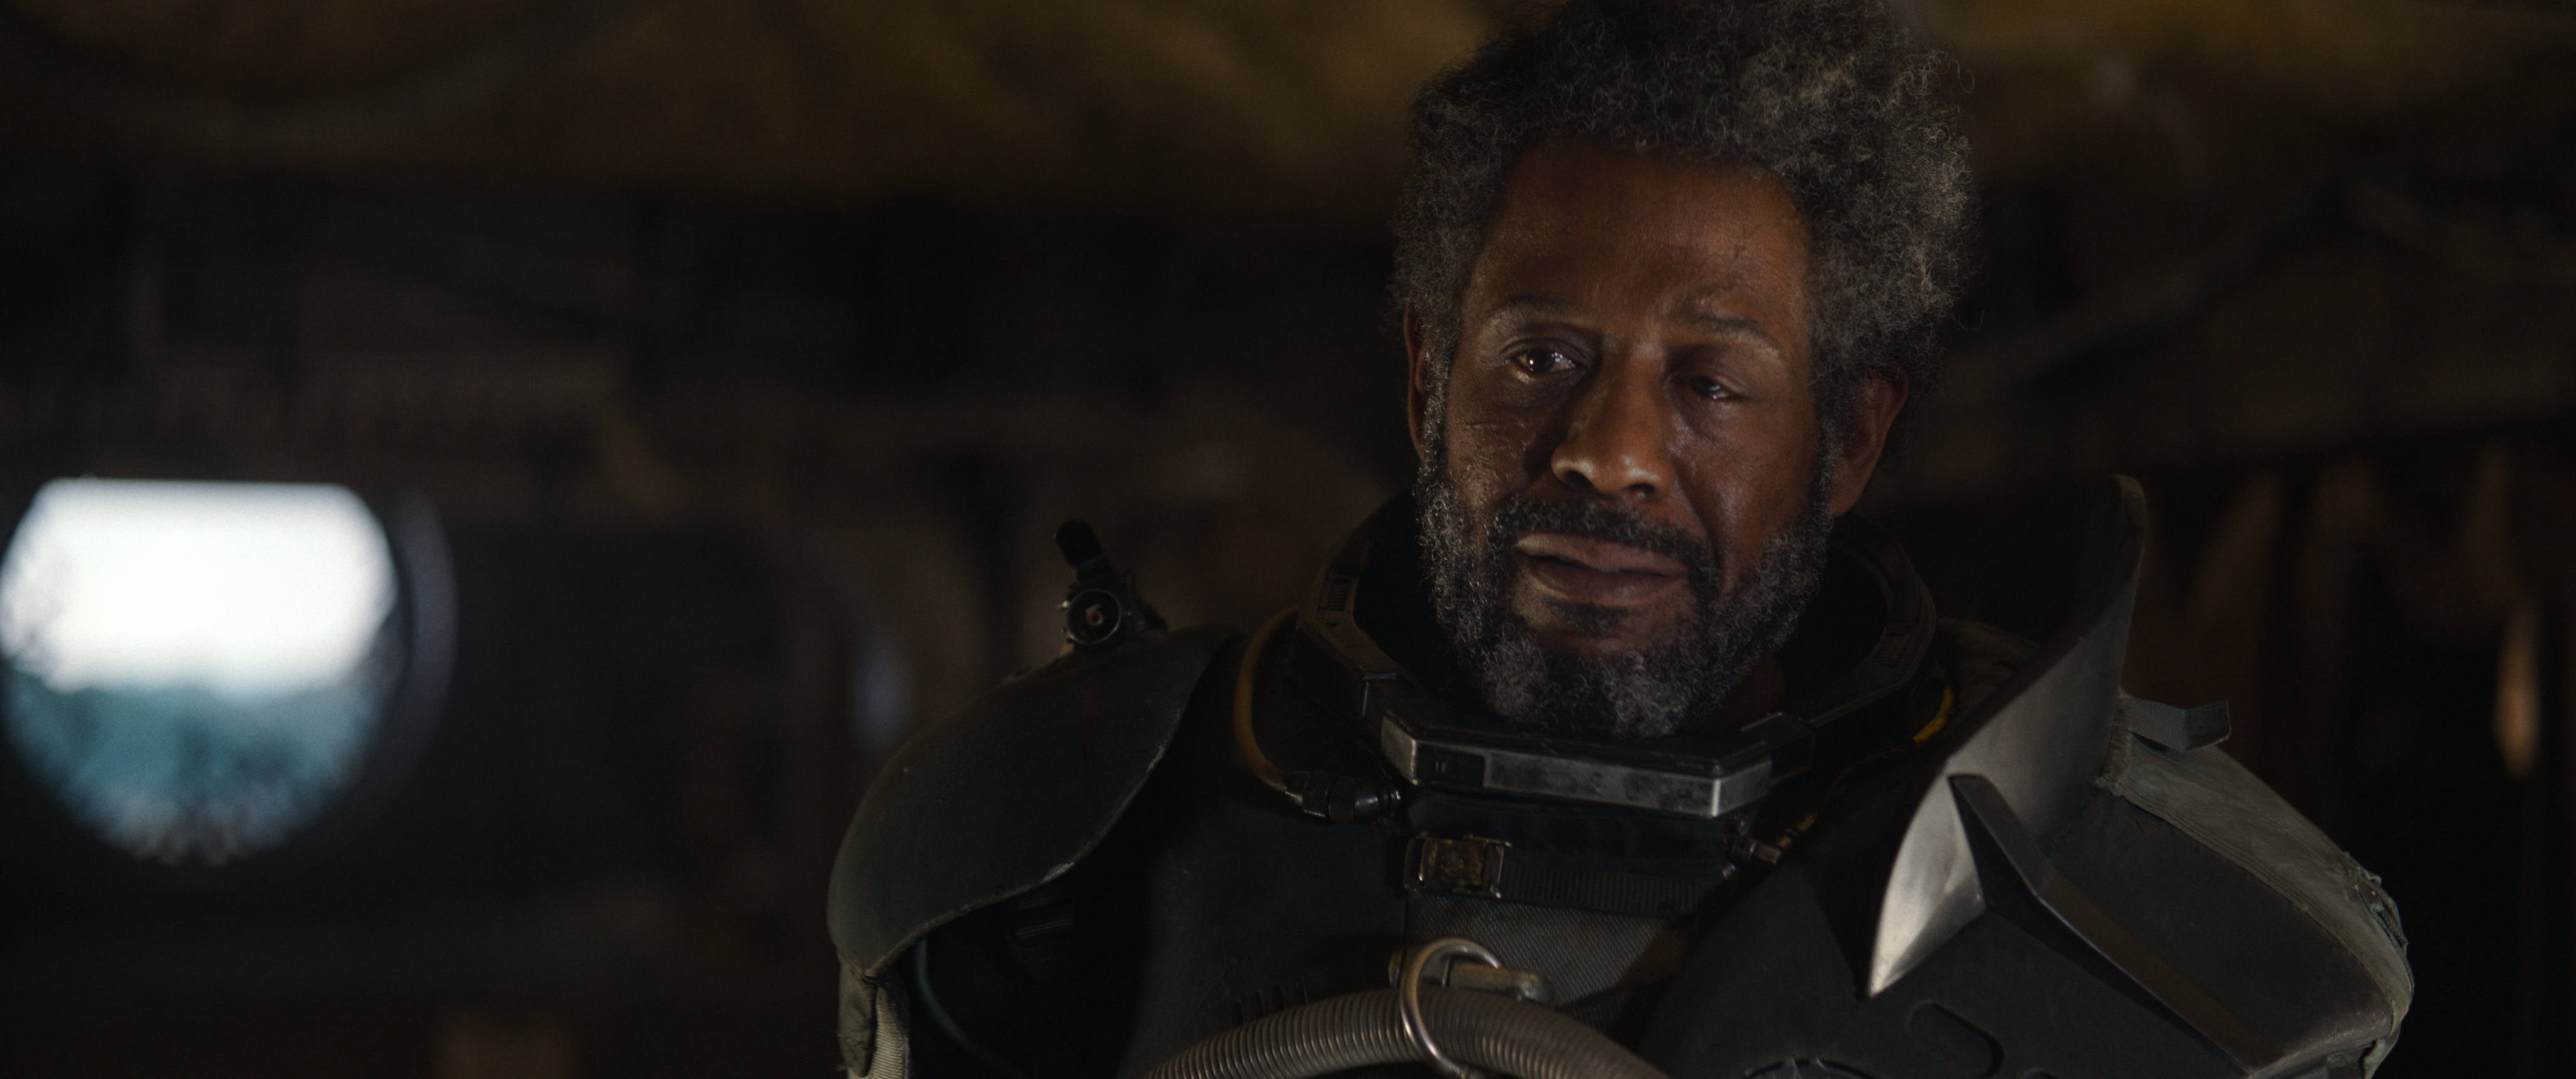 Rogue One: A Star Wars Story..Saw Gerrera (Forest Whitaker)..Ph: Film Frame/Lucasfilm..©Lucasfilm LFL 2016.